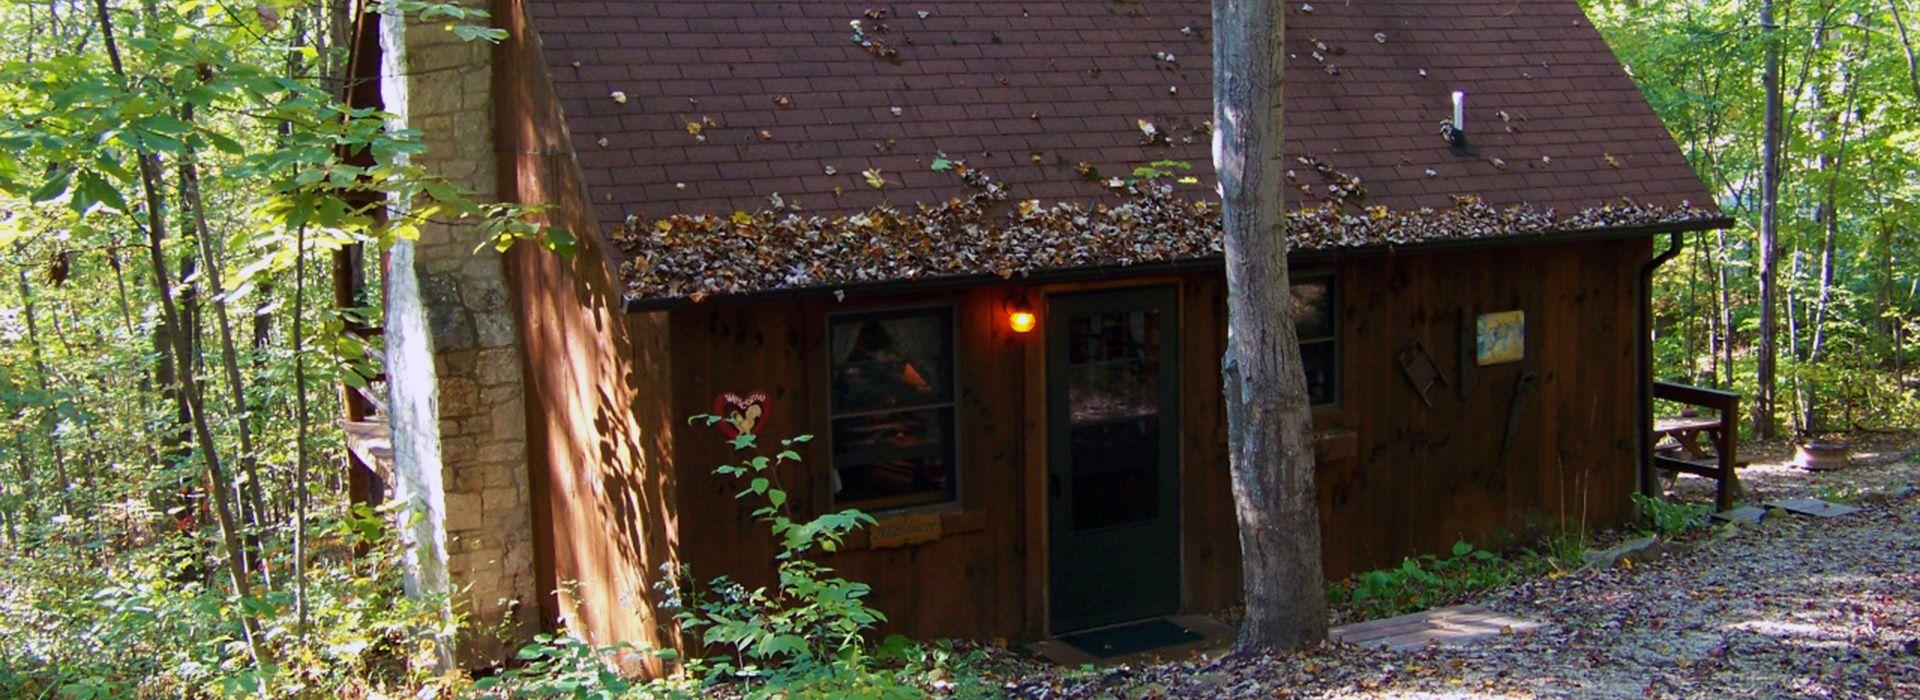 Contact Hocking Hills Cabins